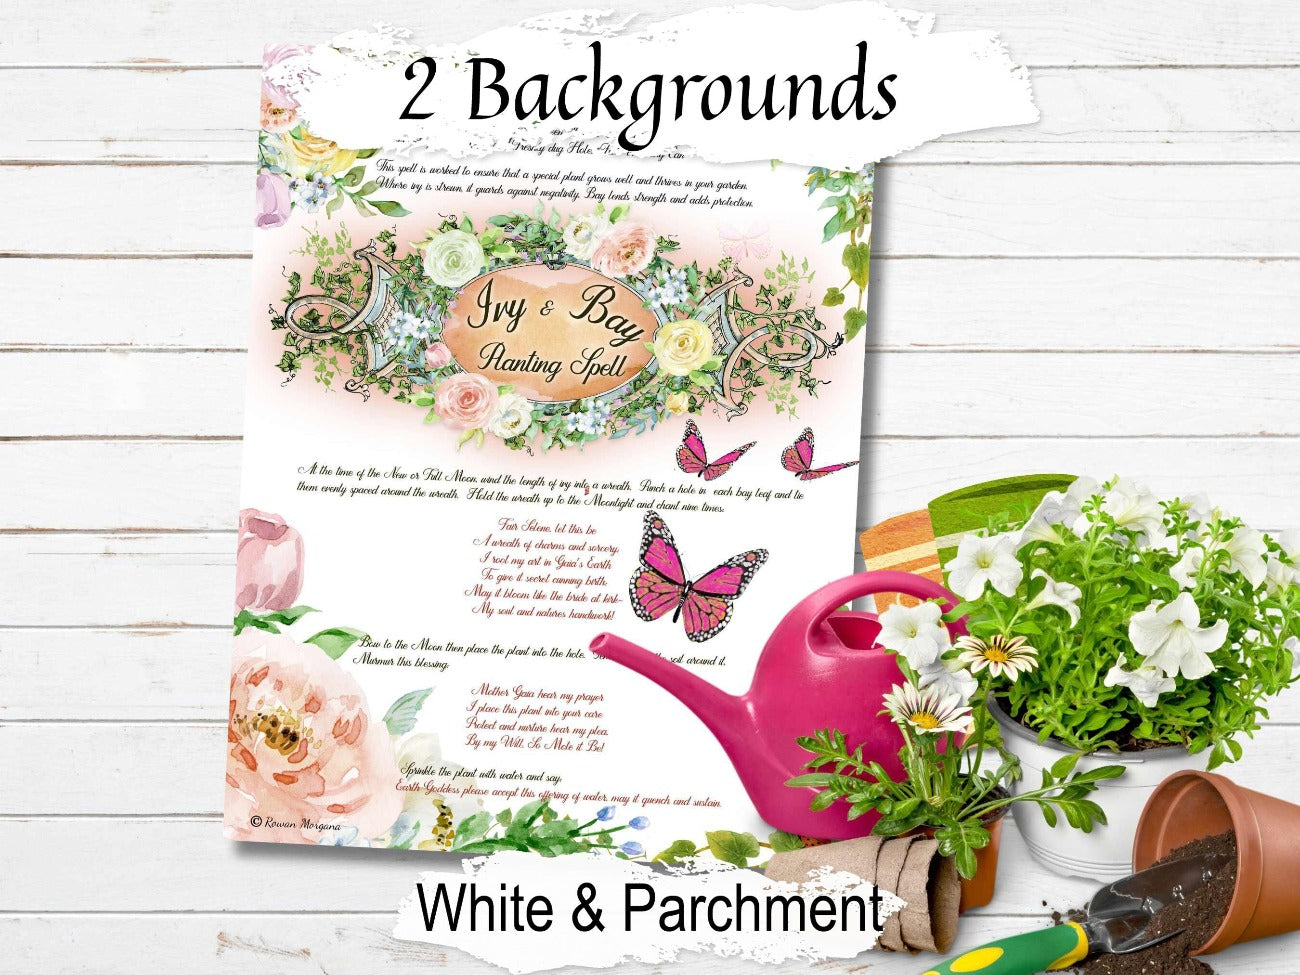 IVY & BAY PLANTING Spell, Herb and Flower Blessing Spell Ritual, Enchant a Plant, Green Witch Garden Spell Printable for your Grimoire - Morgana Magick Spell